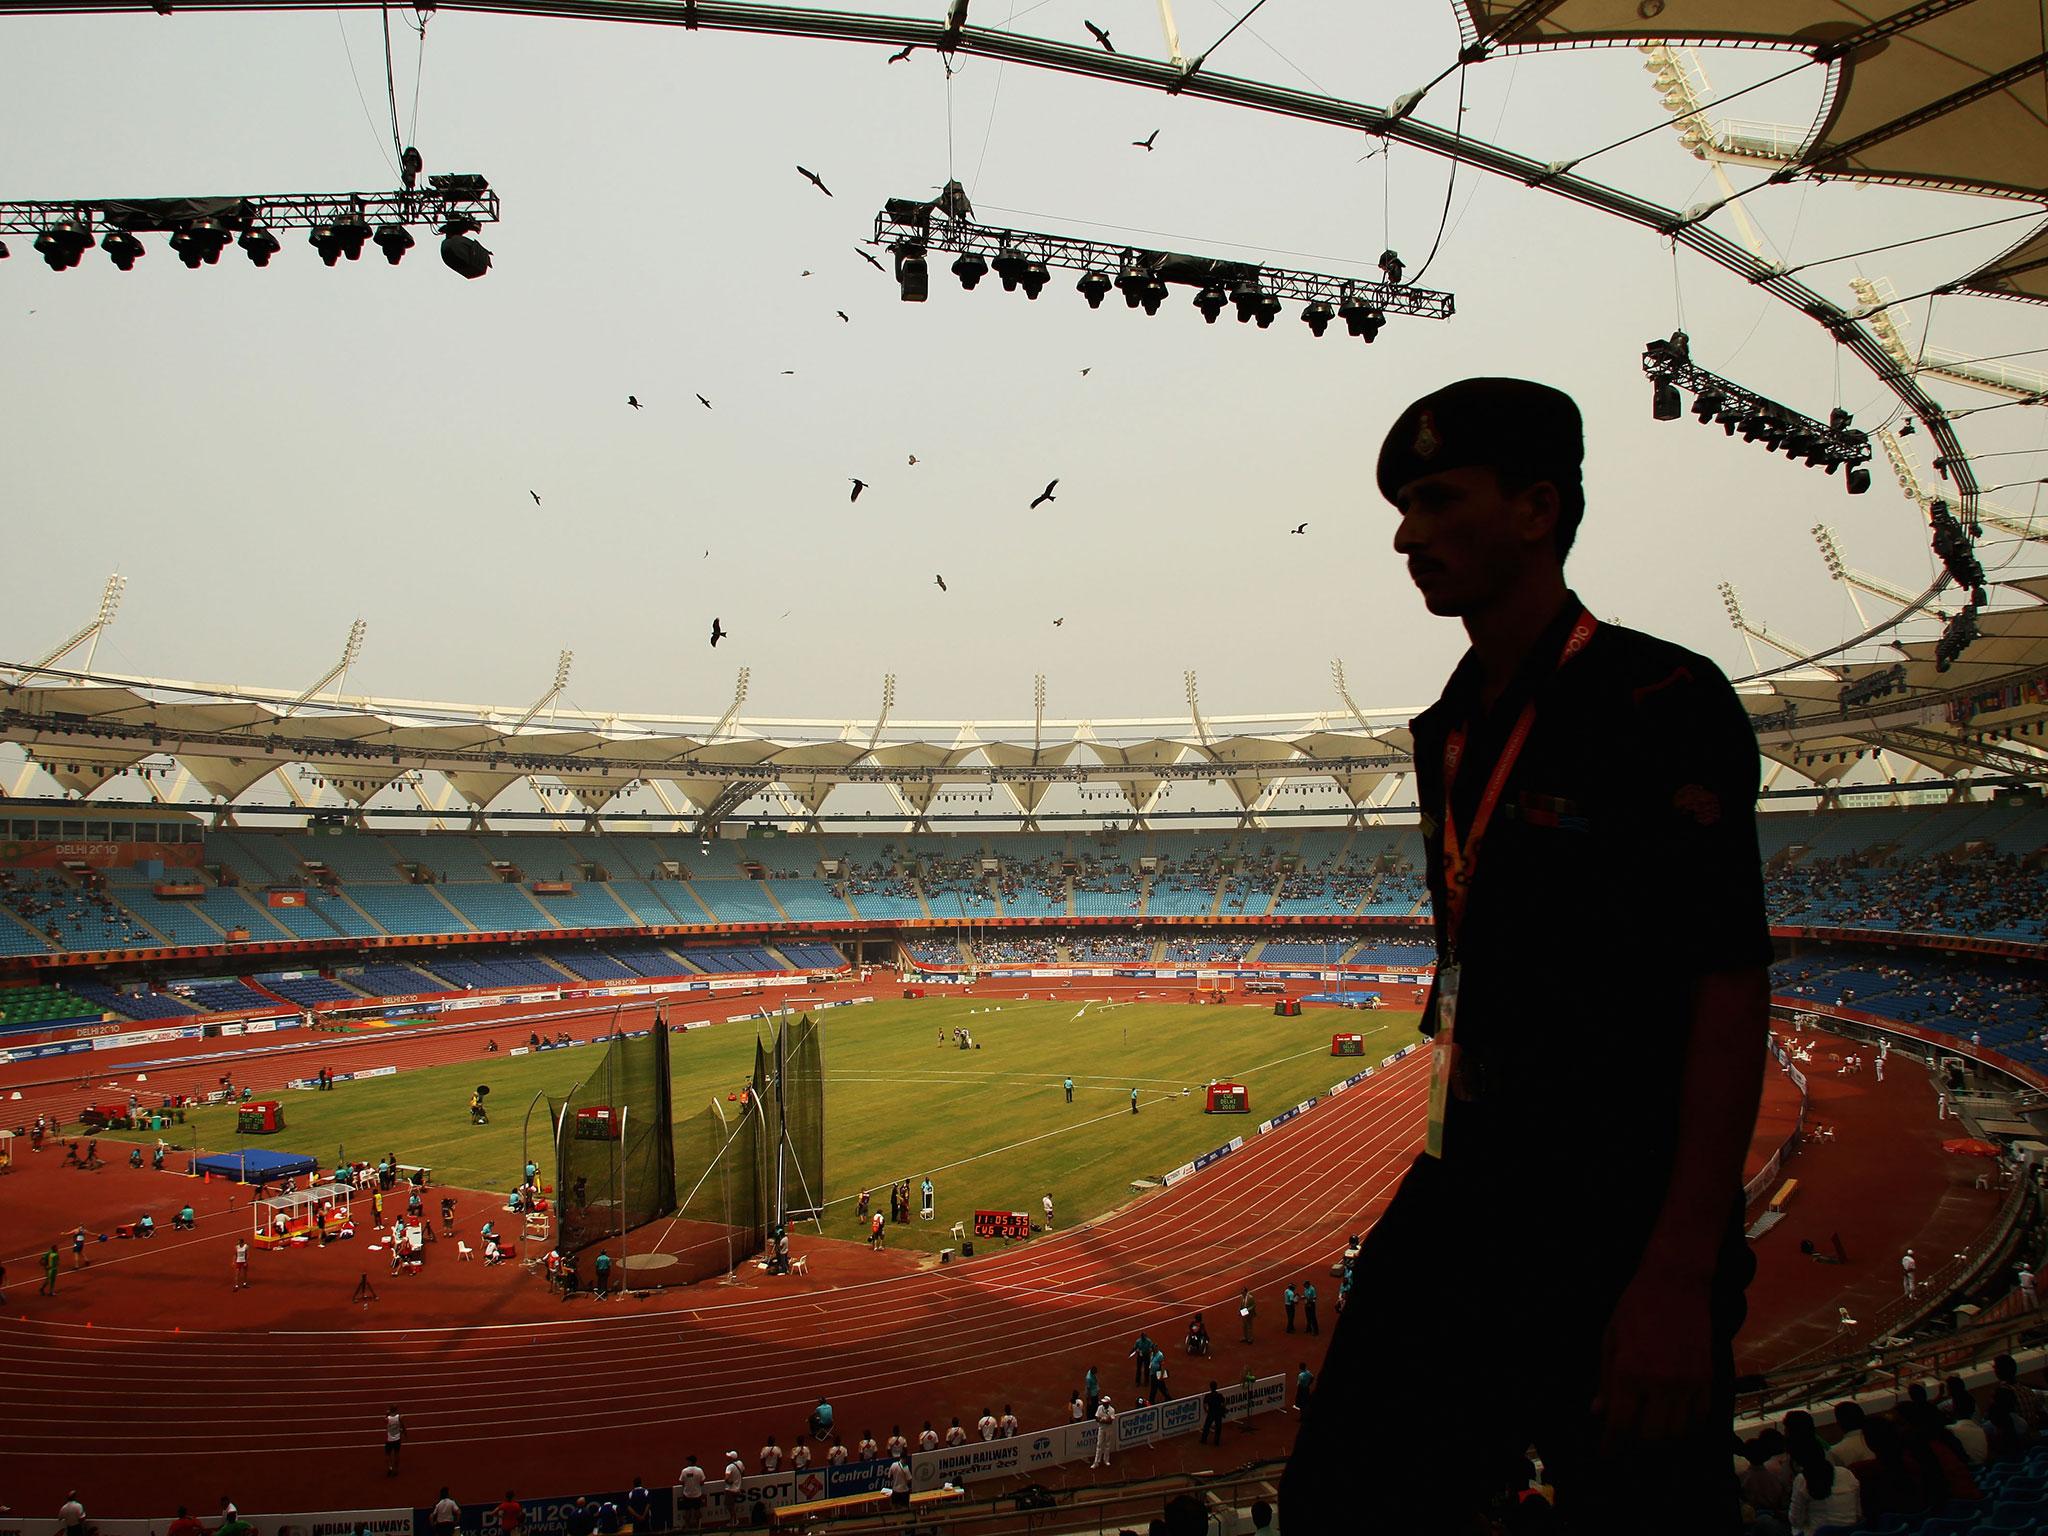 &#13;
The 2010 Games in New Delhi failed to deliver on their early promises &#13;